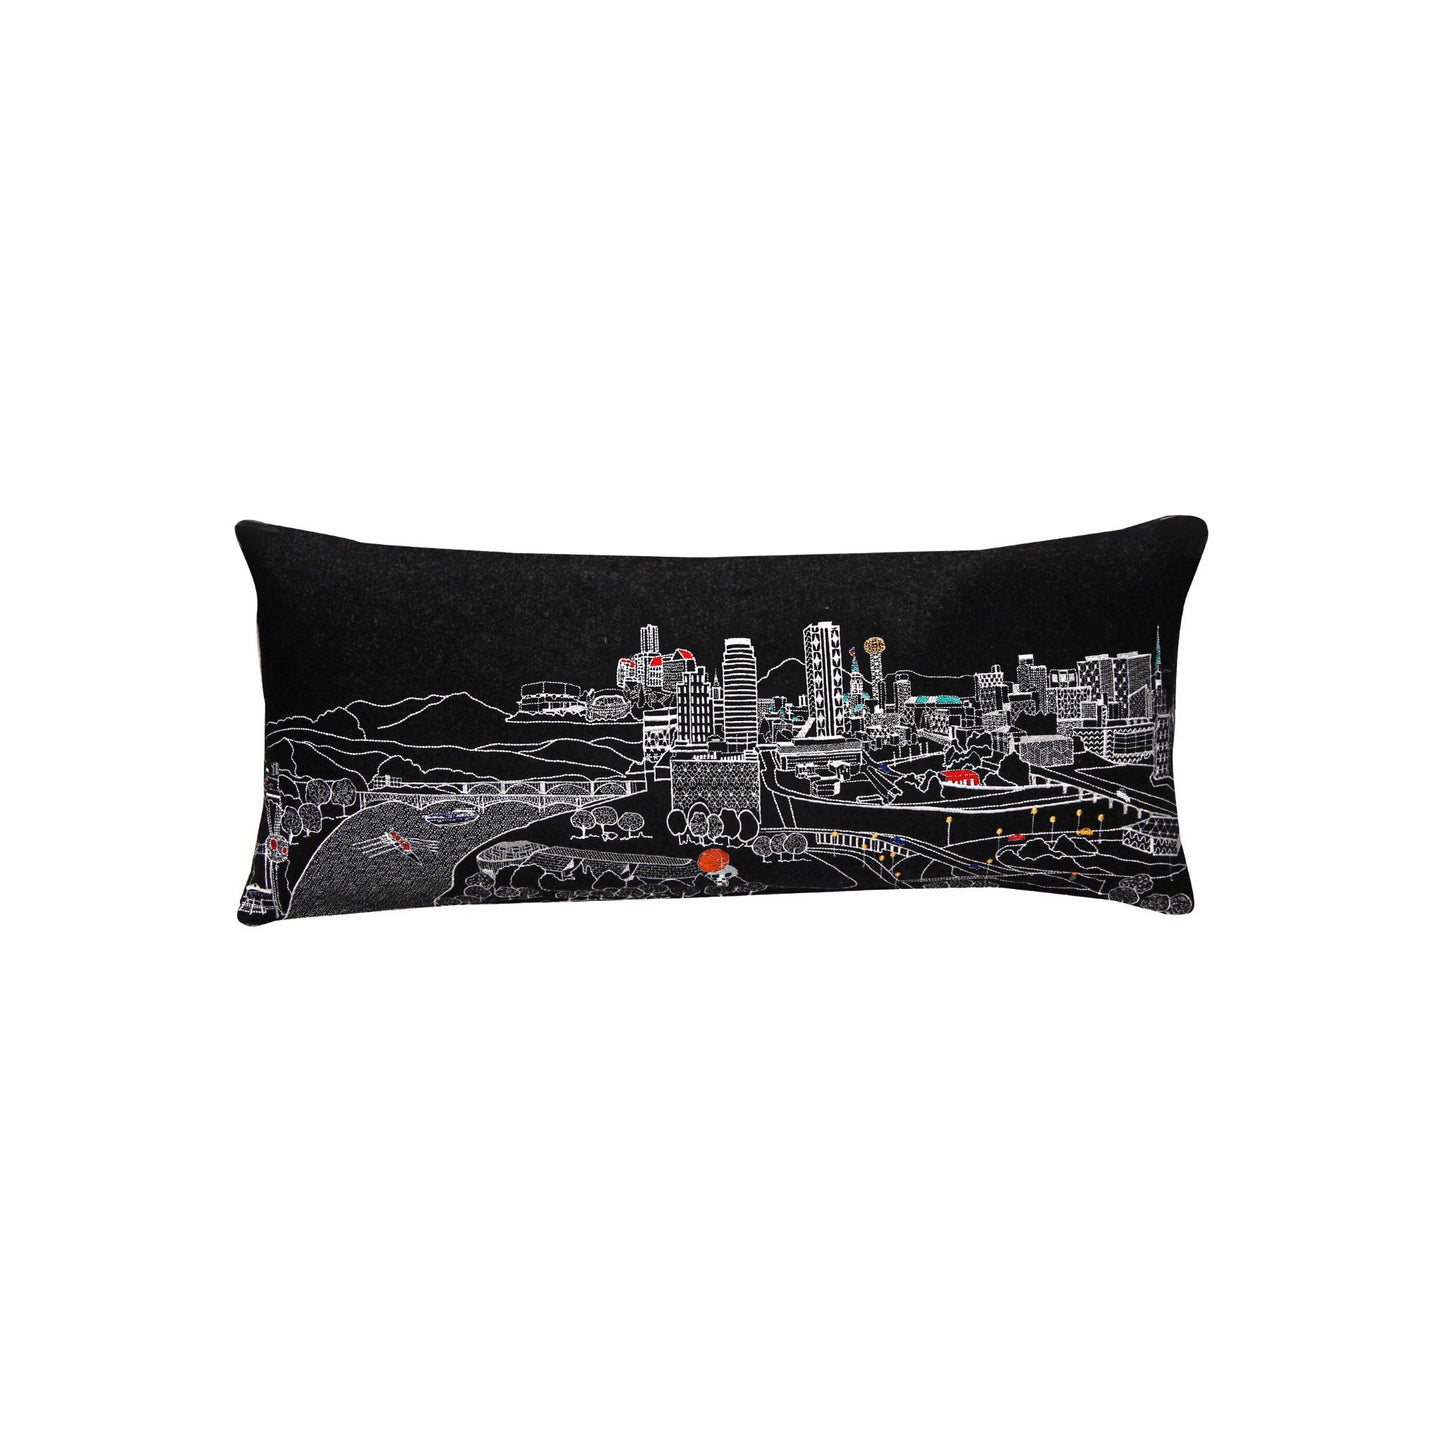 Knoxville Pillow